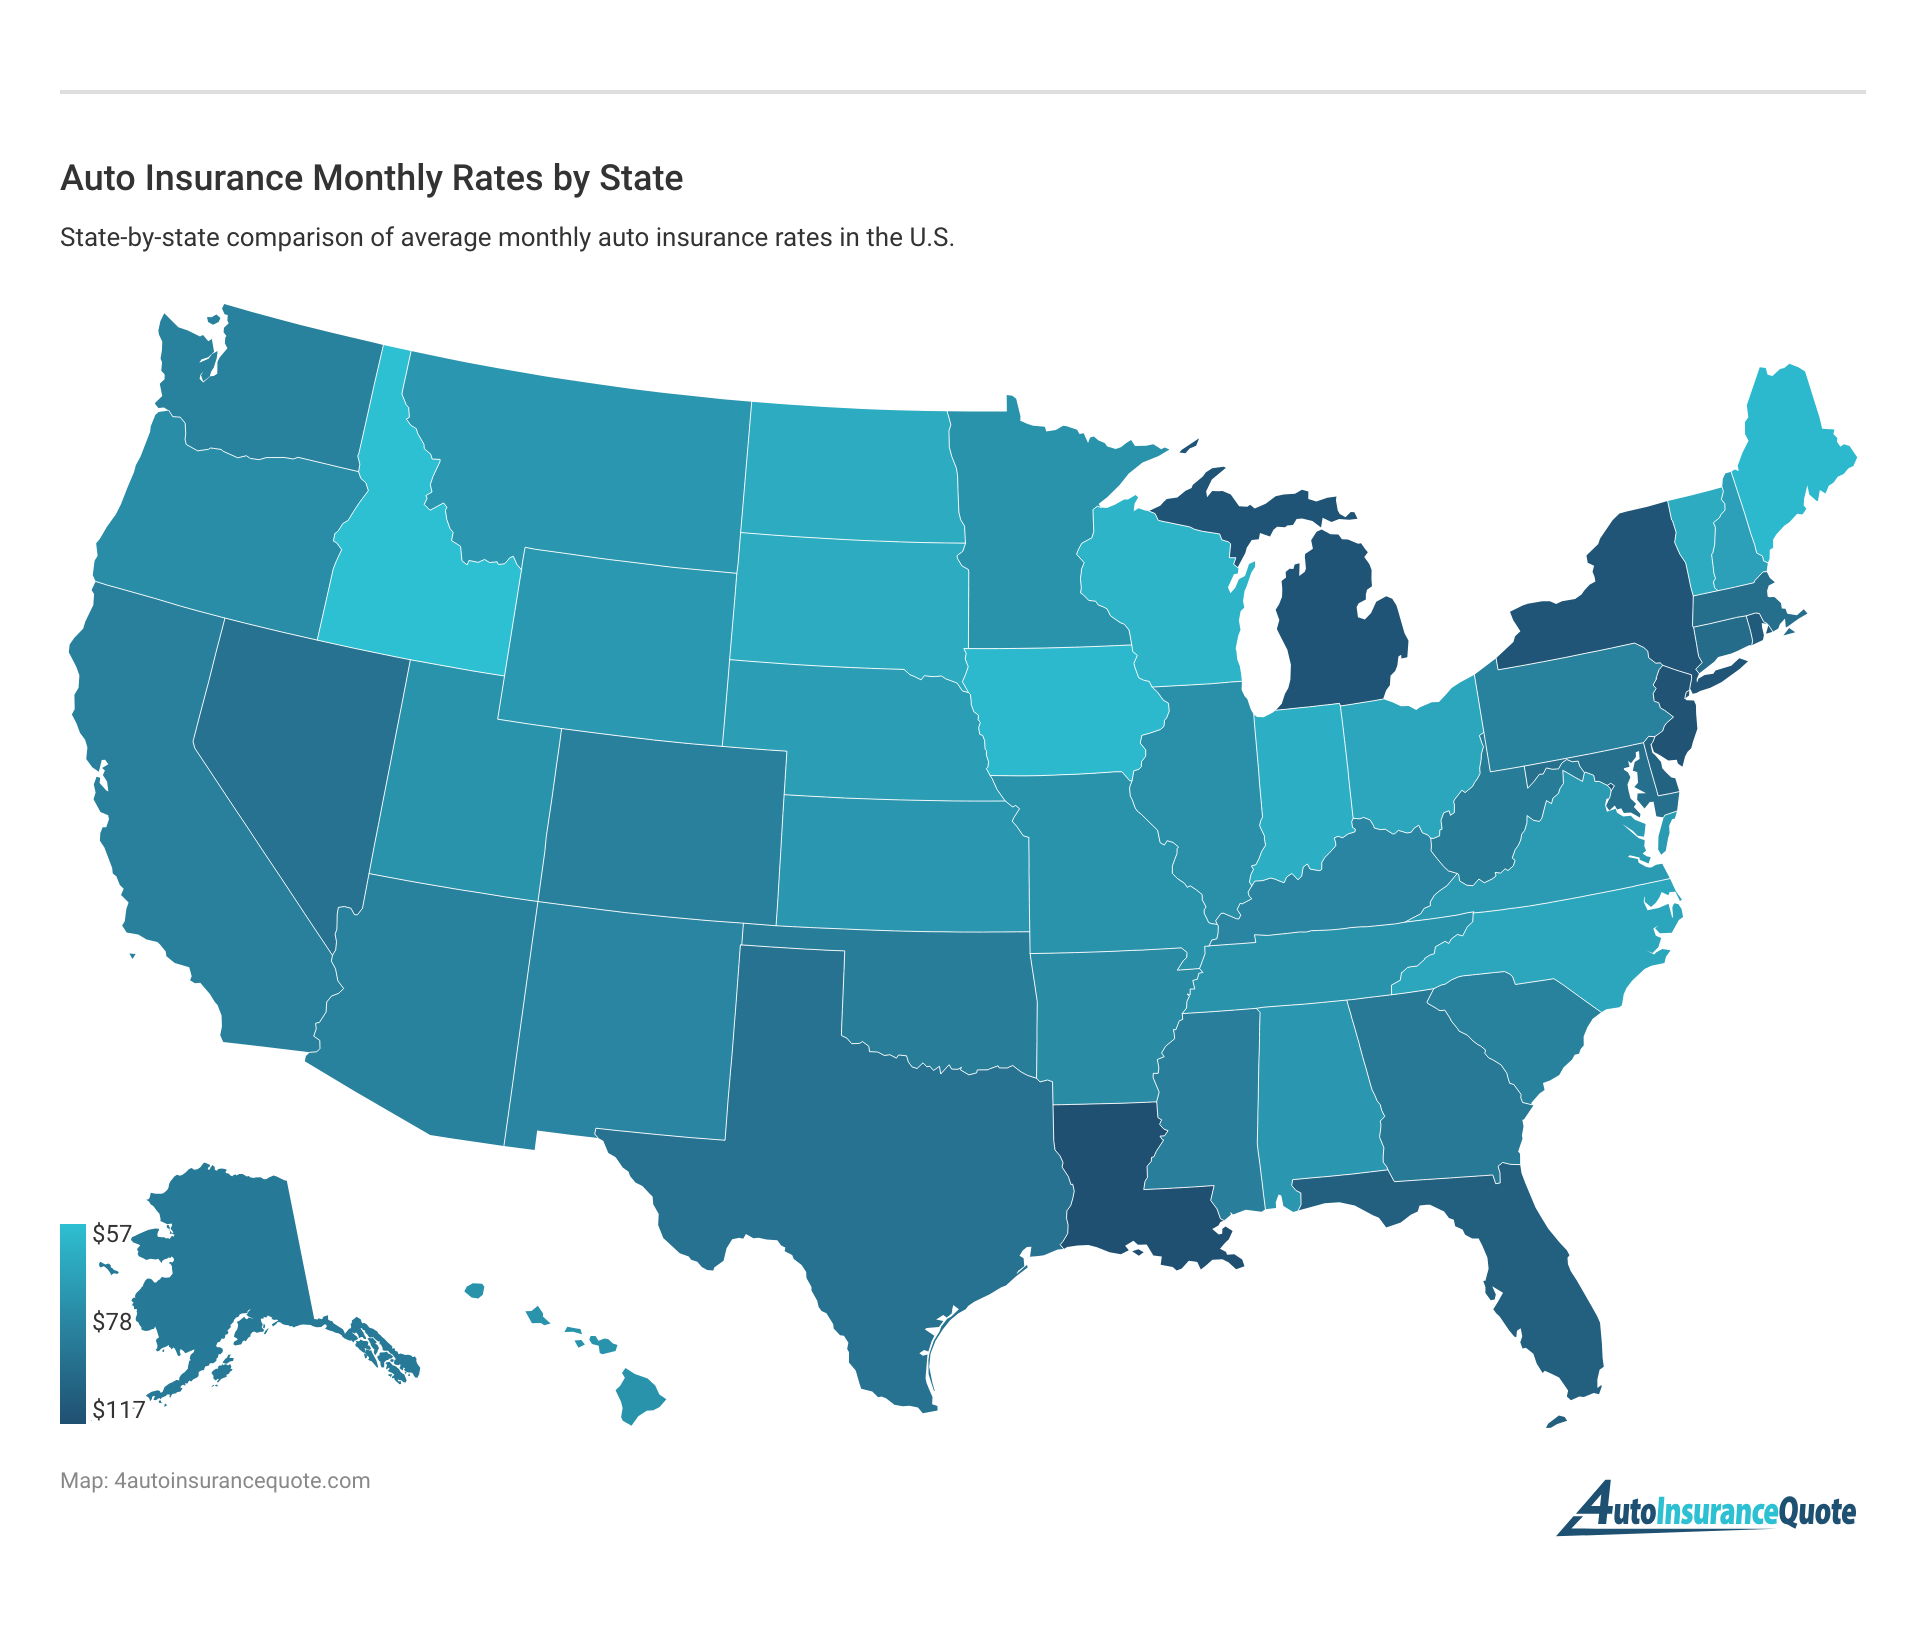 <h3>Auto Insurance Monthly Rates by State</h3>